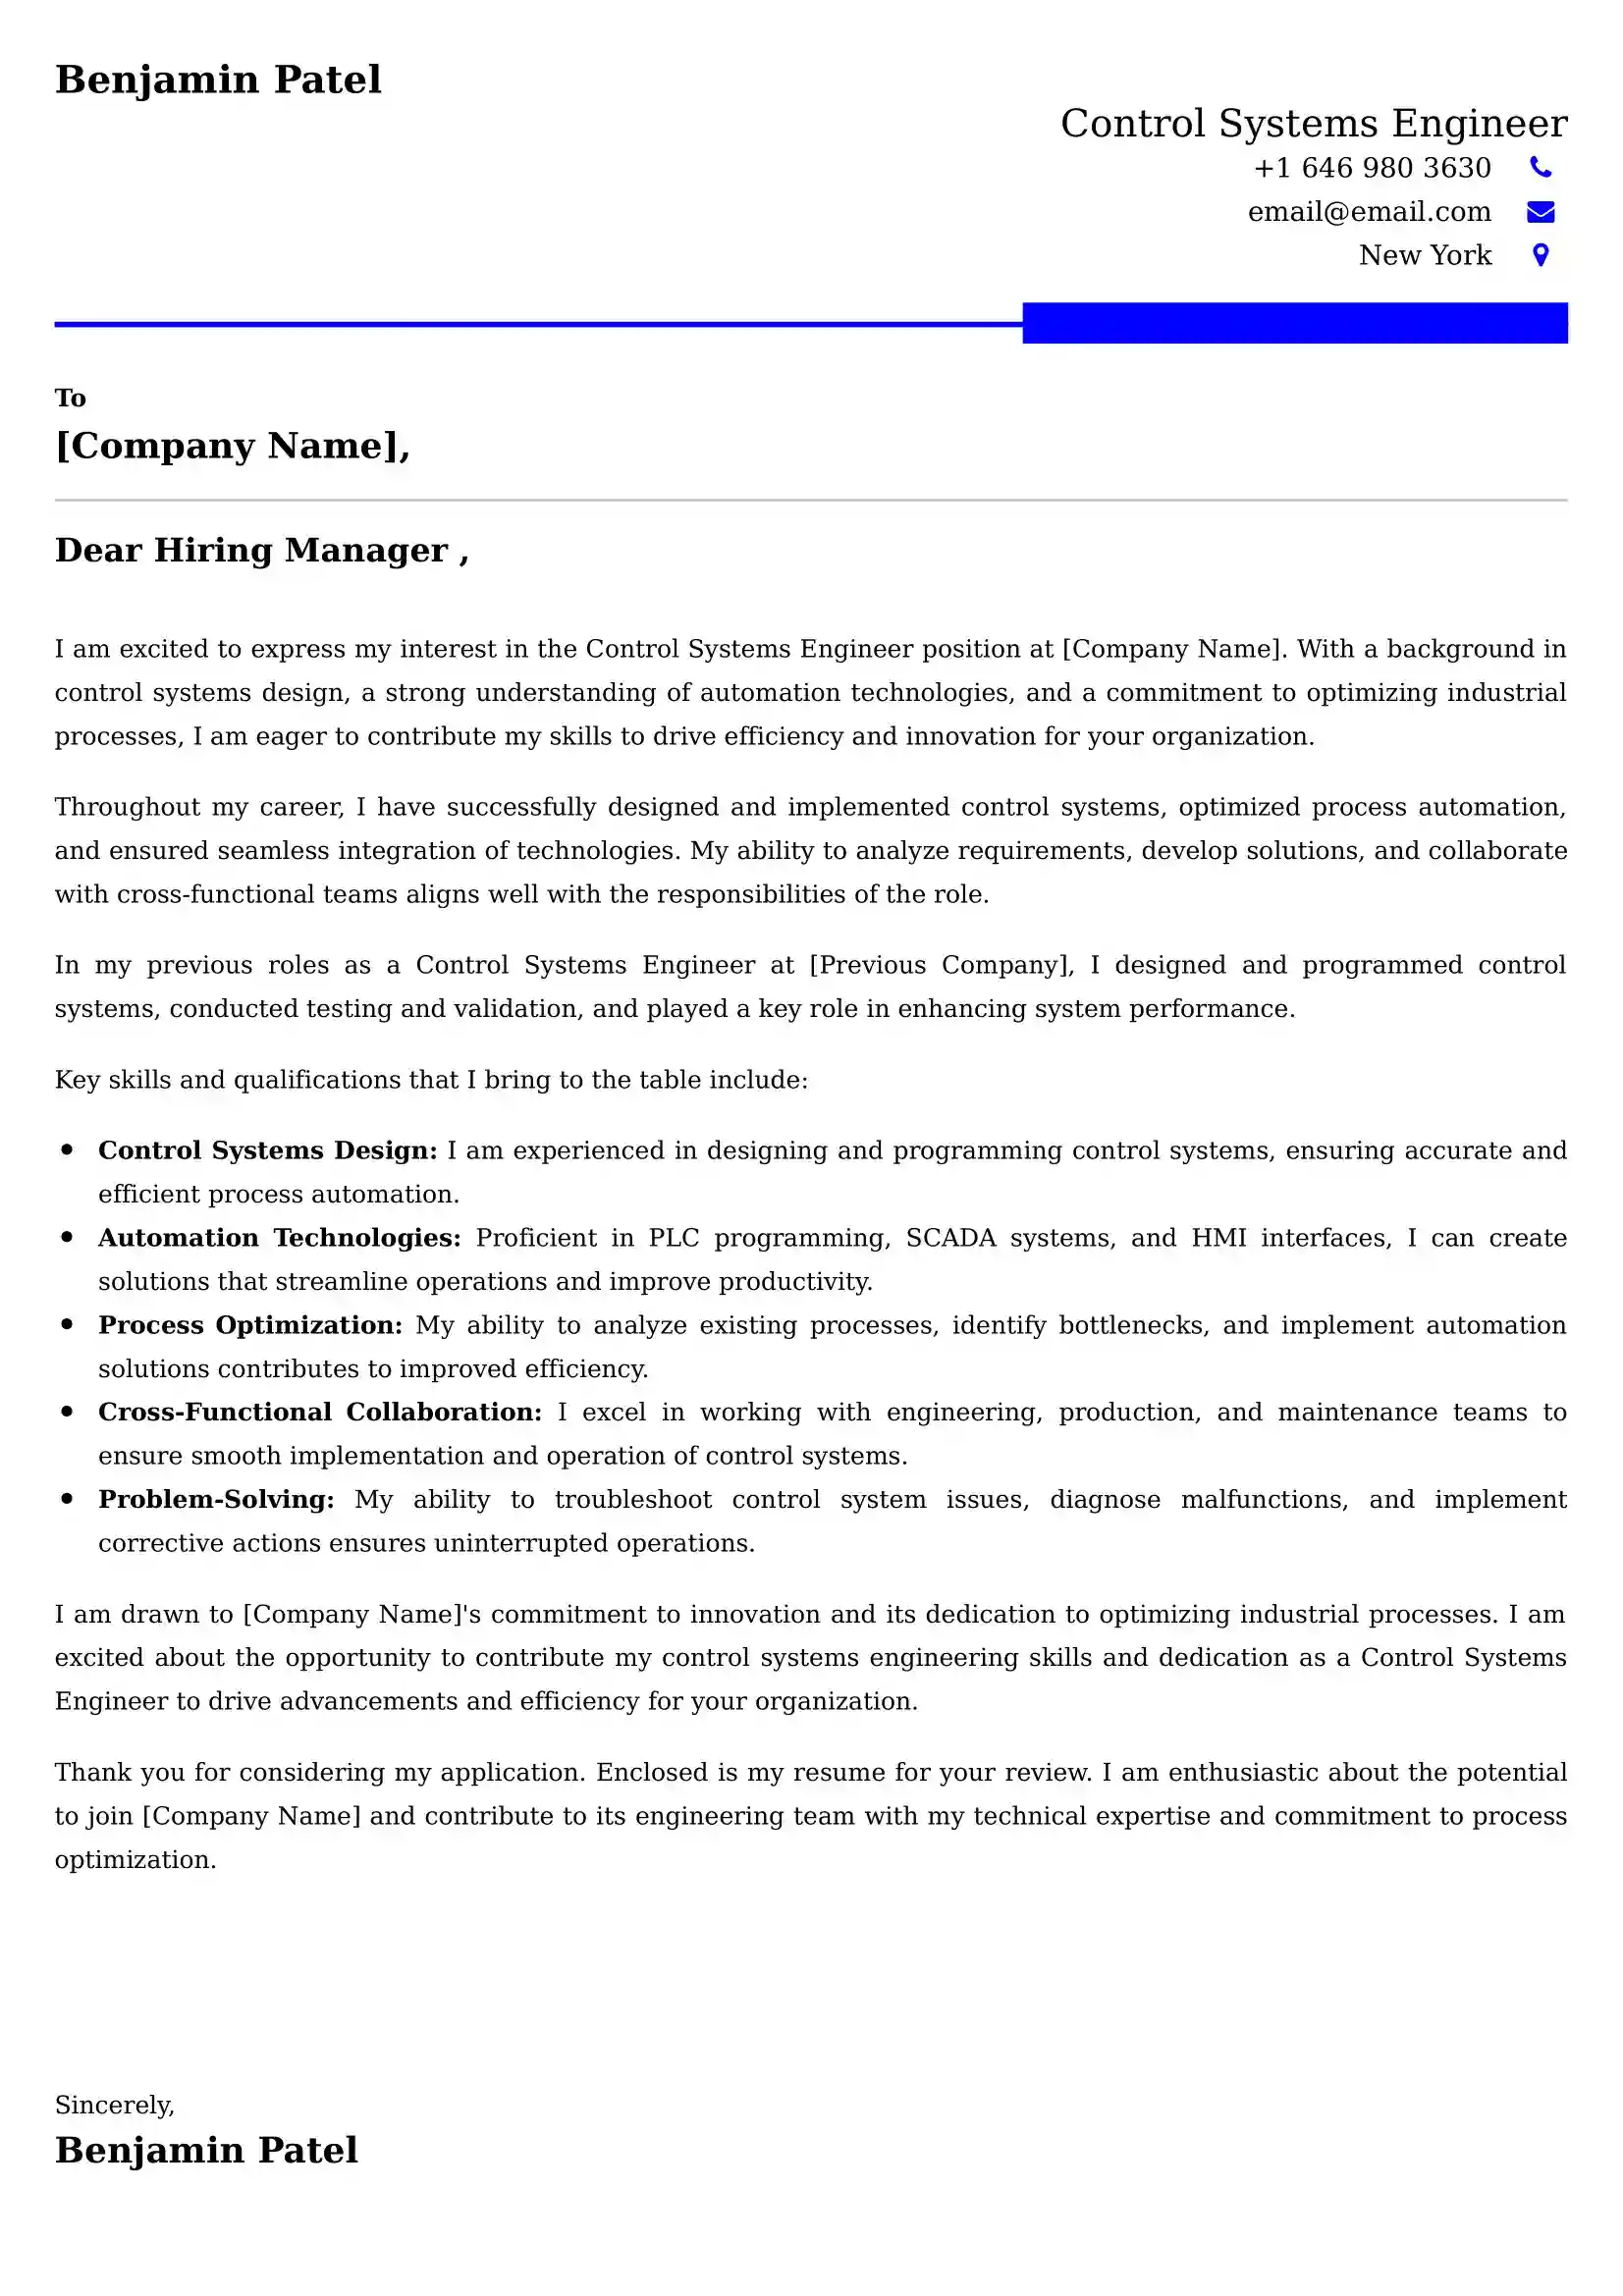 Control Systems Engineer Cover Letter Examples -Latest Brazilian Templates